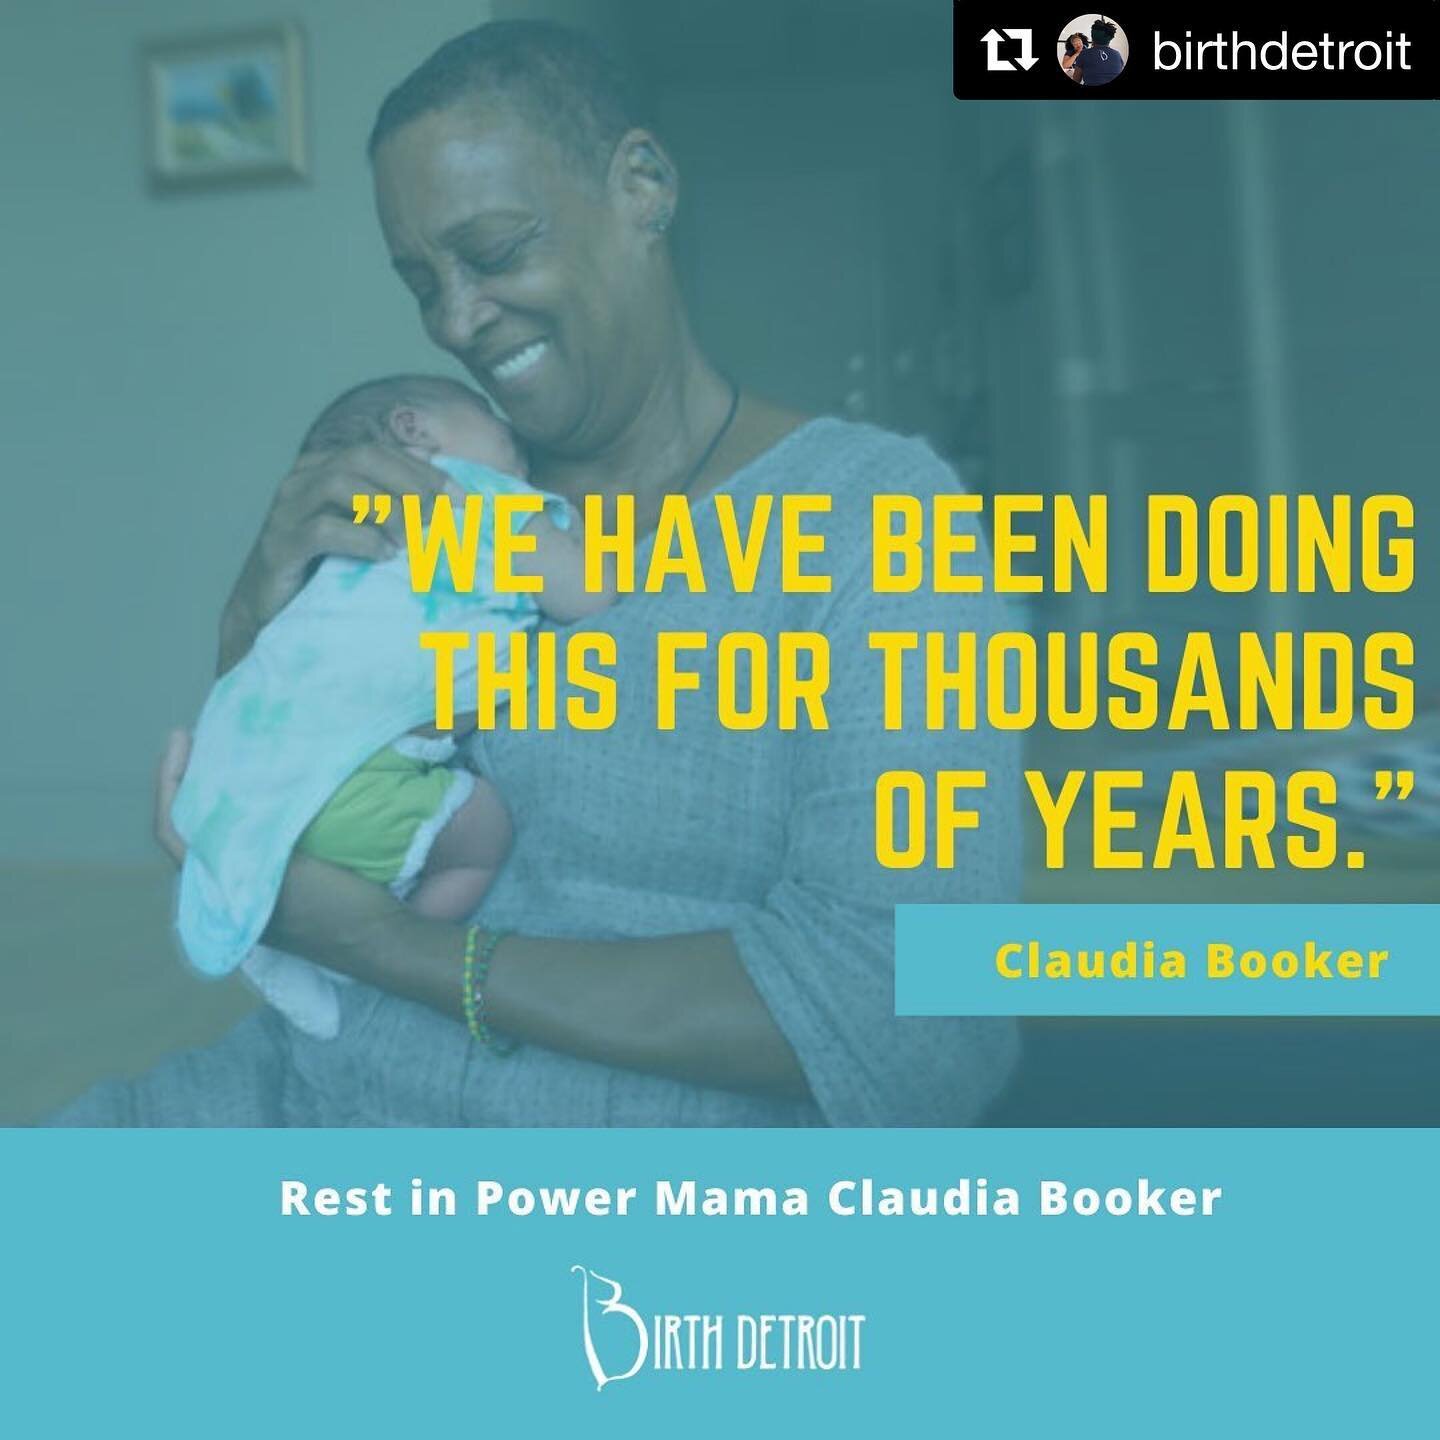 #Repost @birthdetroit
・・・
Today, we&rsquo;d like to honor the legacy of Mama Claudia Booker who became an ancestor in February of 2020. Mama Claudia was a Grand Midwife and fierce advocate dedicated to improving maternal health in black communities. 